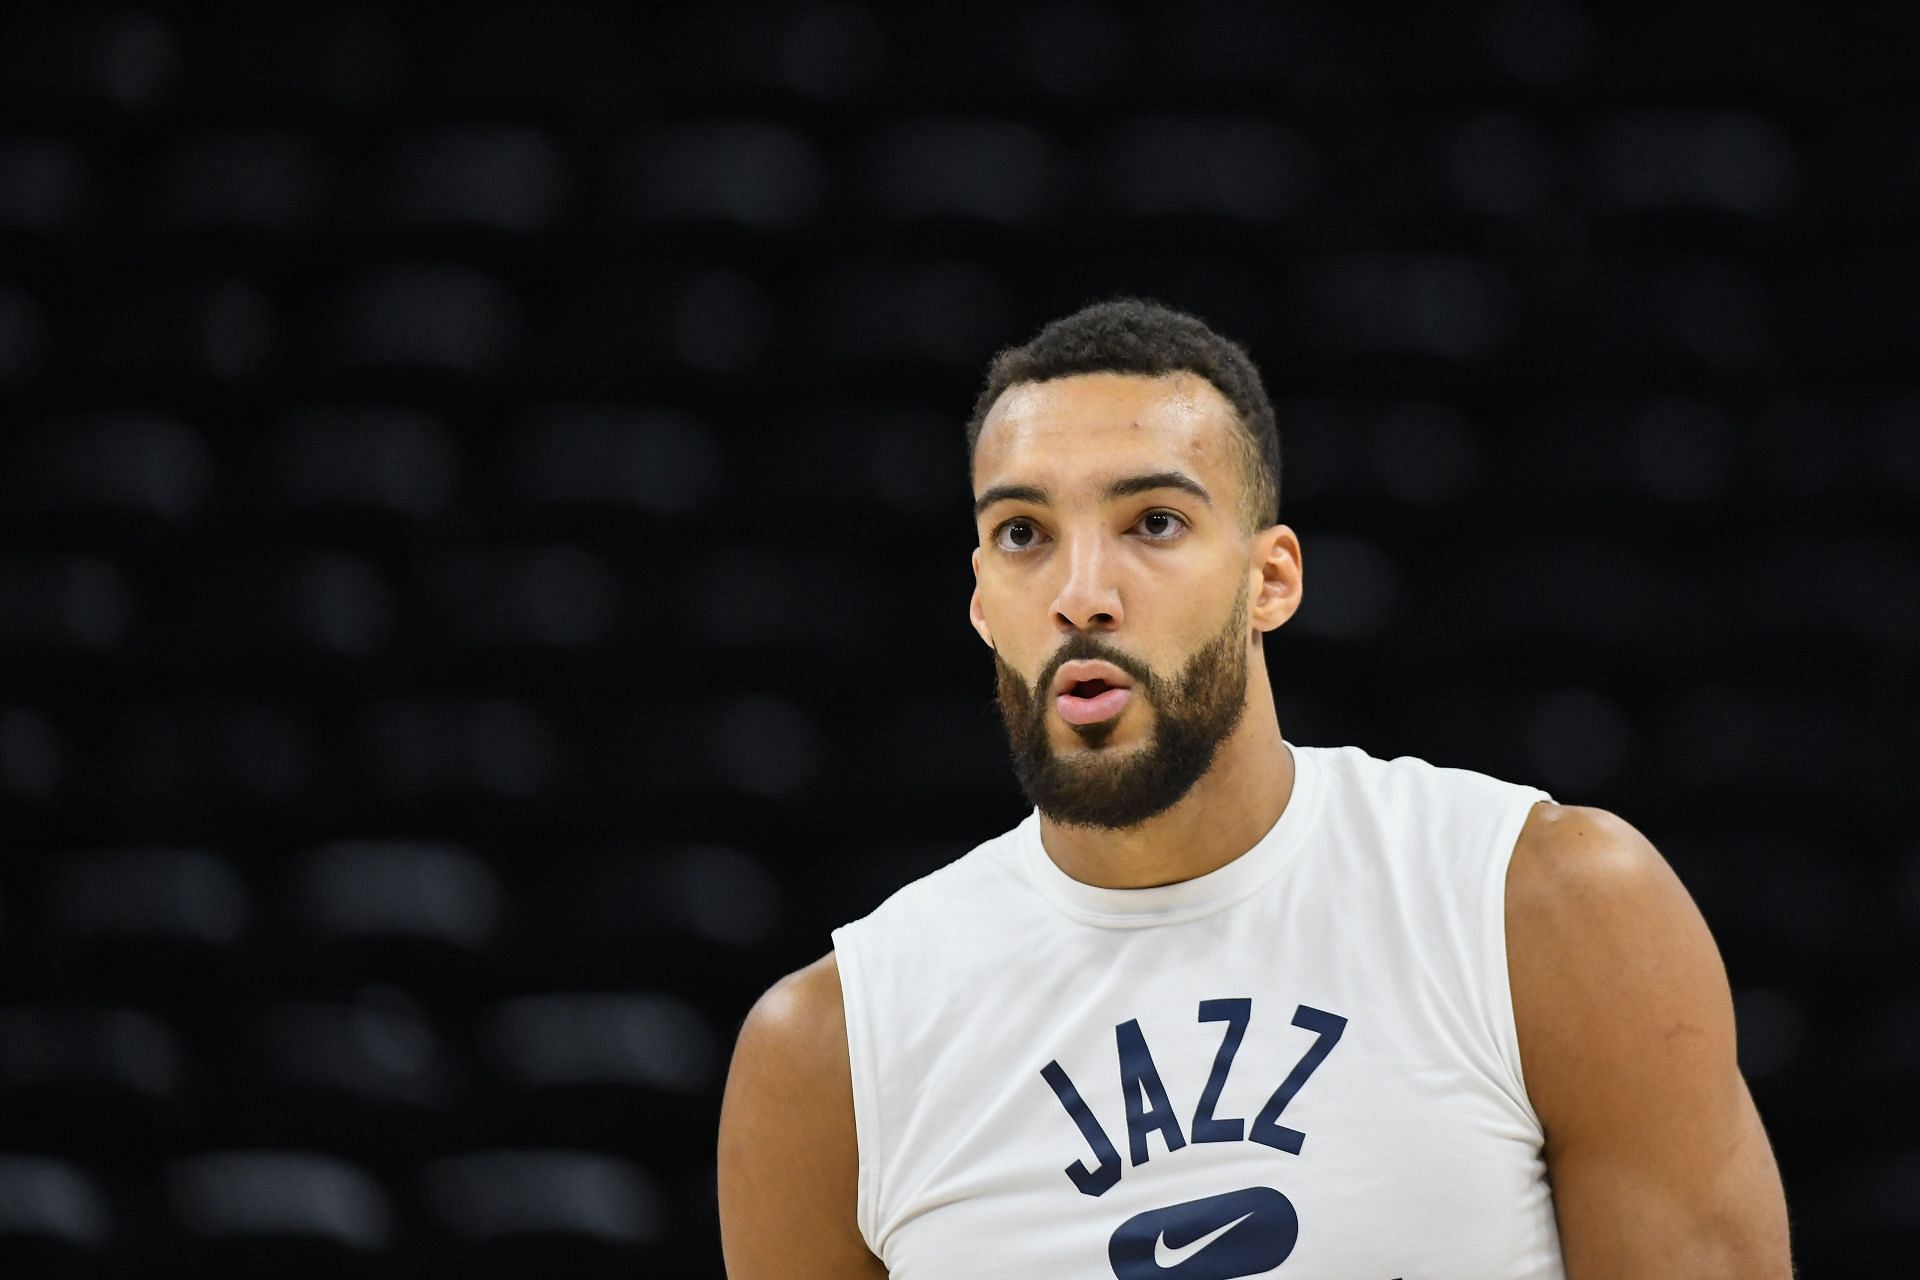 Rudy Gobert of the Utah Jazz warms up before Game 6 in the first round of the Western Conference playoffs against the Dallas Mavericks on April 28 in Salt Lake City, Utah.